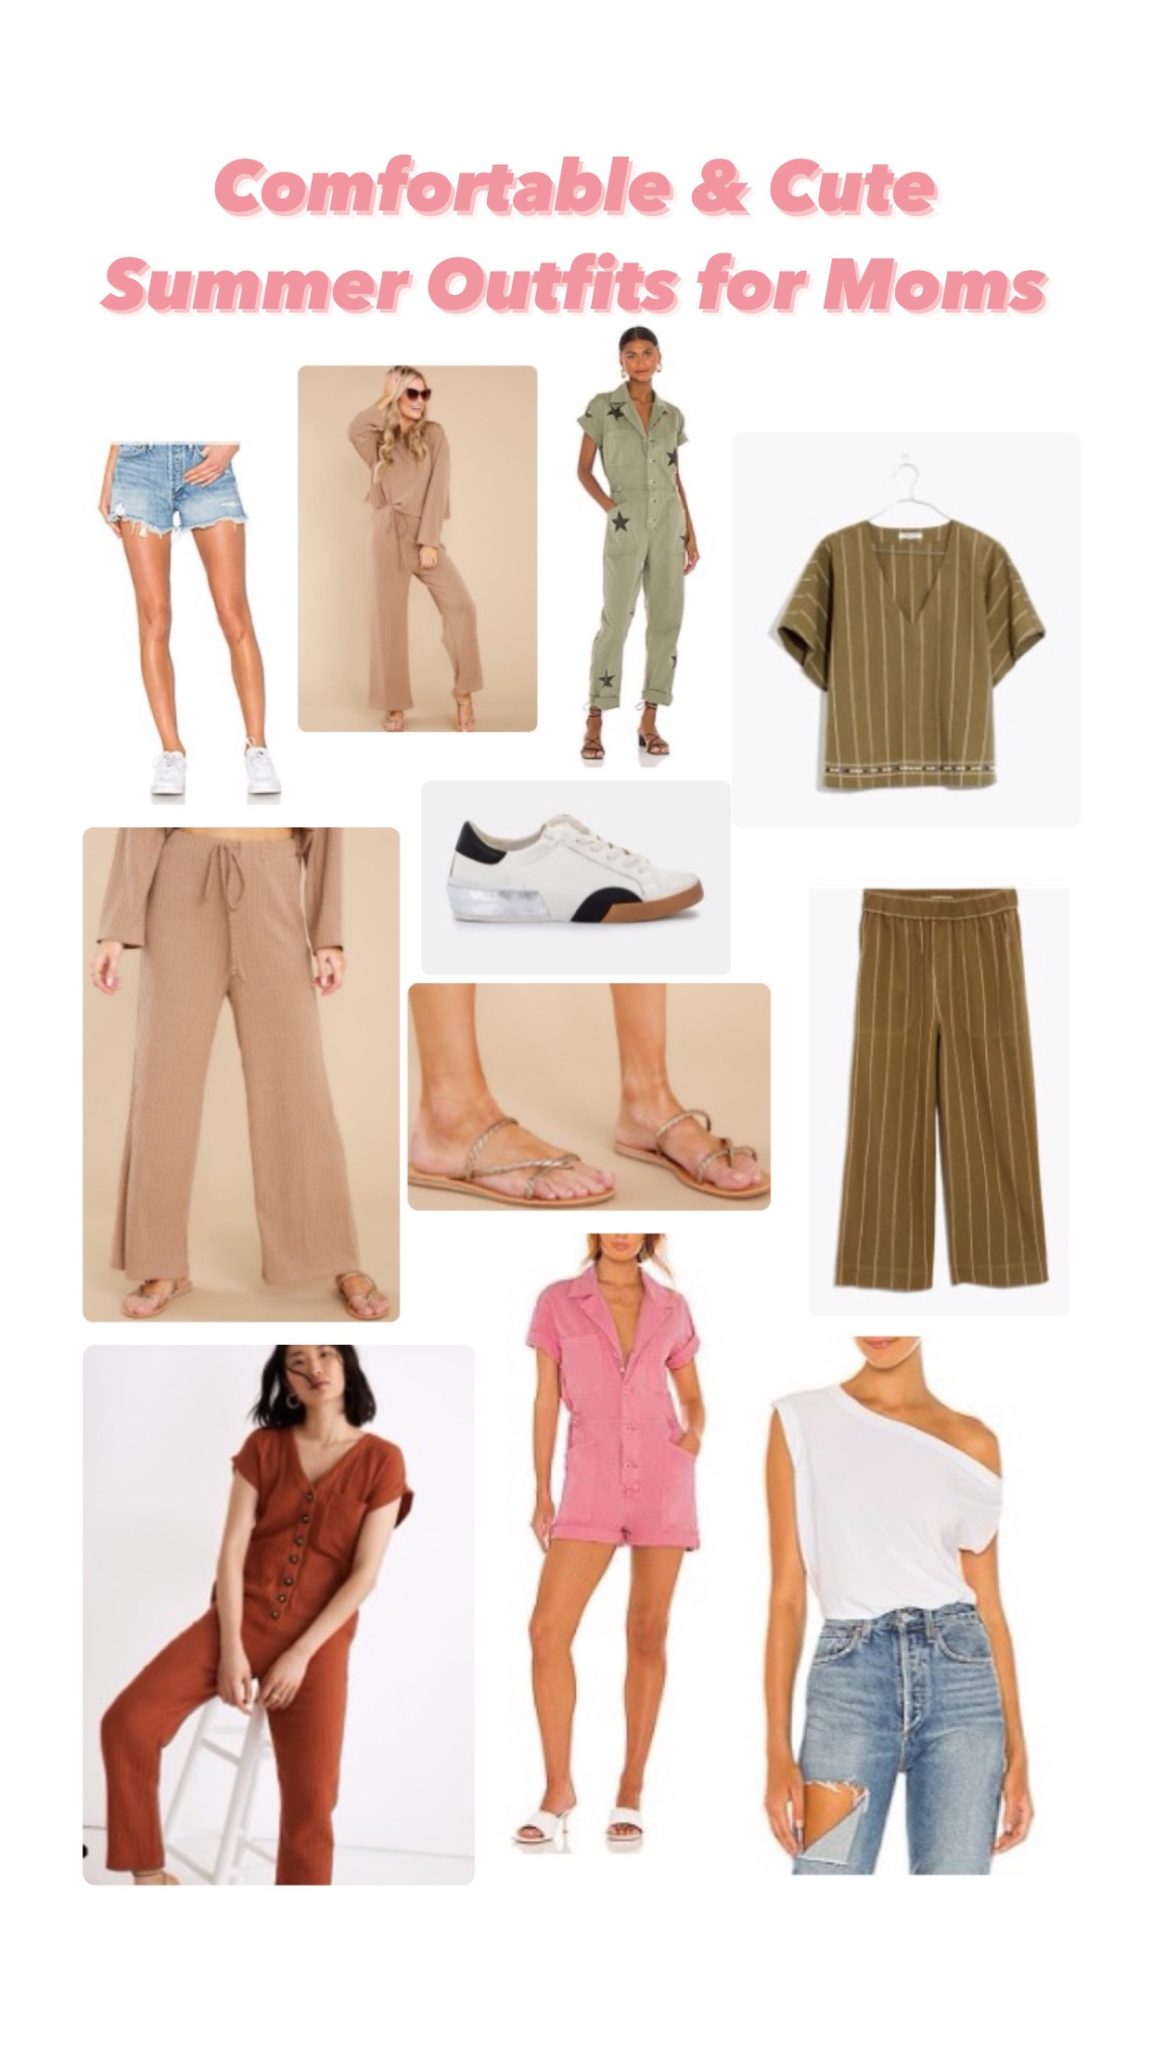 Comfortable & Cute Summer Outfits for Moms